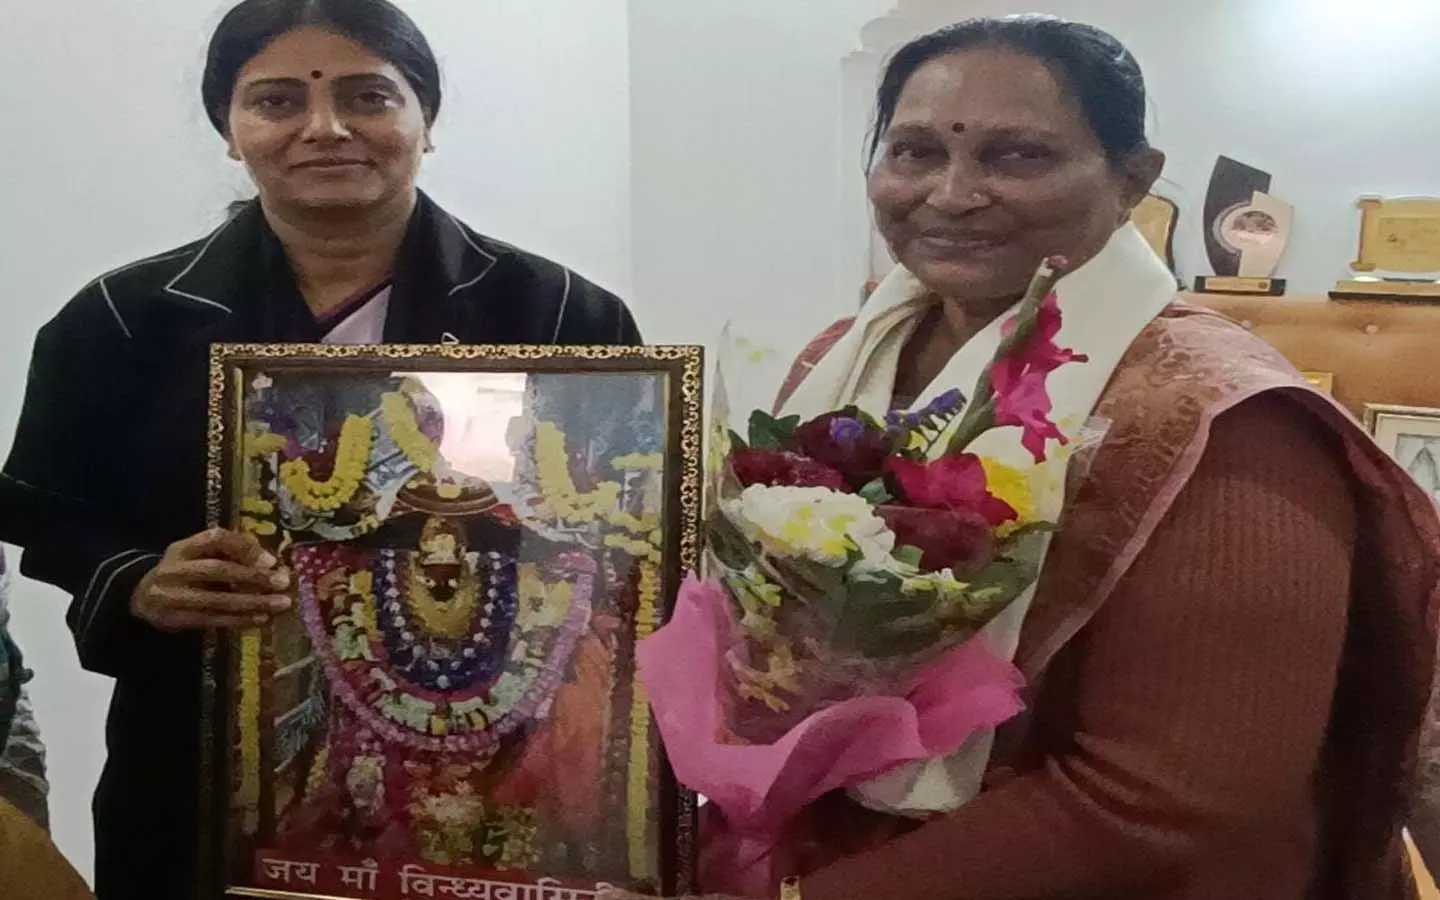 In Mirzapur, Union Minister Anupriya Patel congratulated both the celebrities who received Padma Shri award.